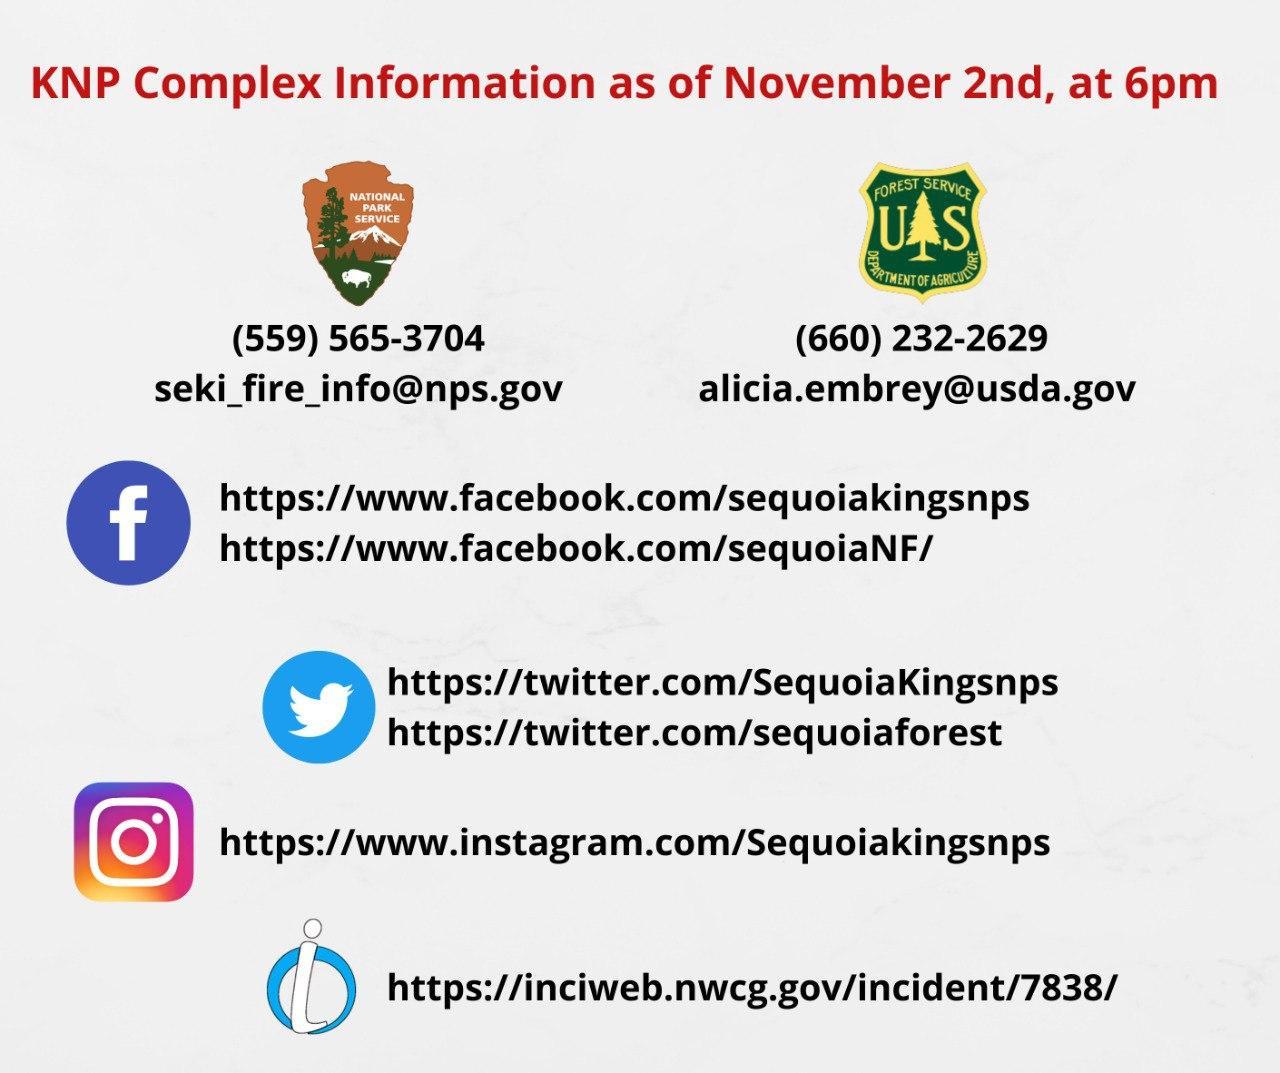 KNP Complex Contact Information as of 11/2/21